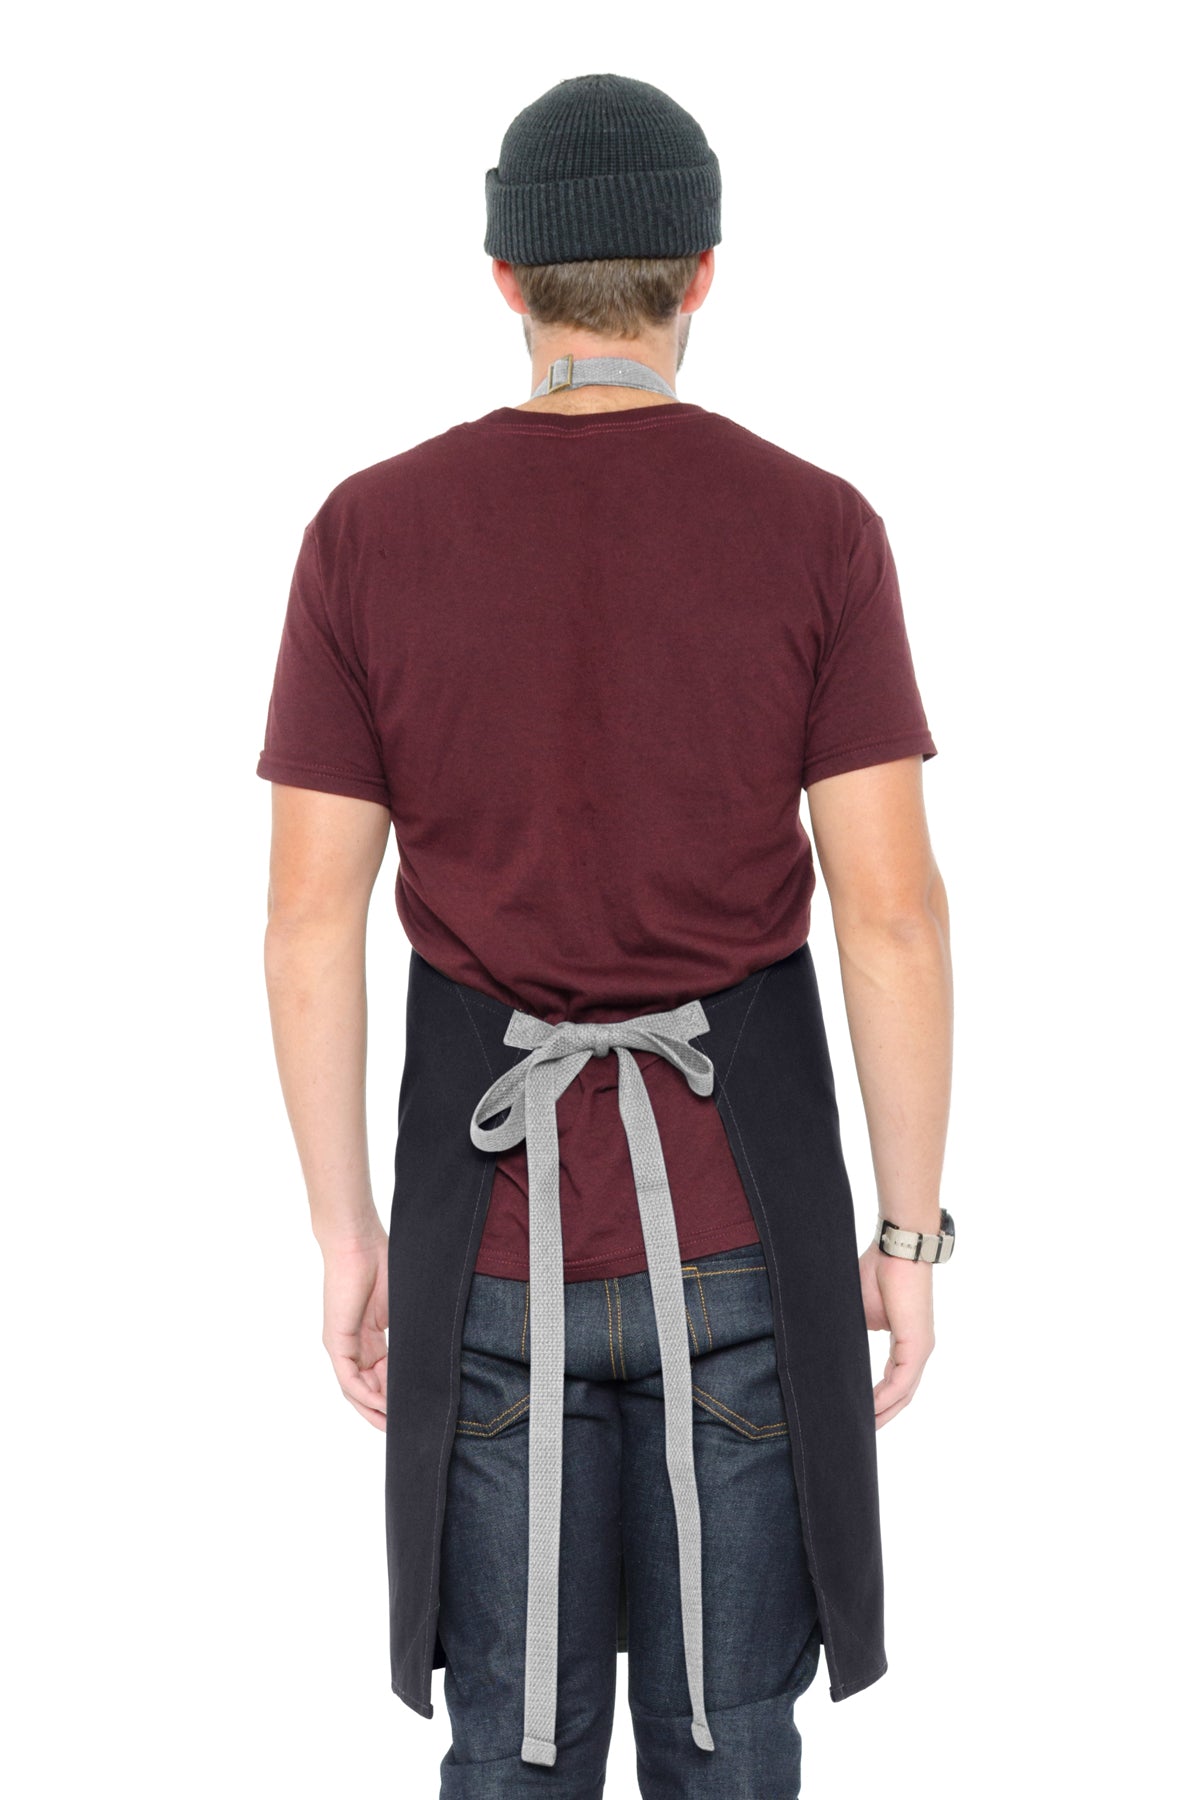 Lucca Apron Navy